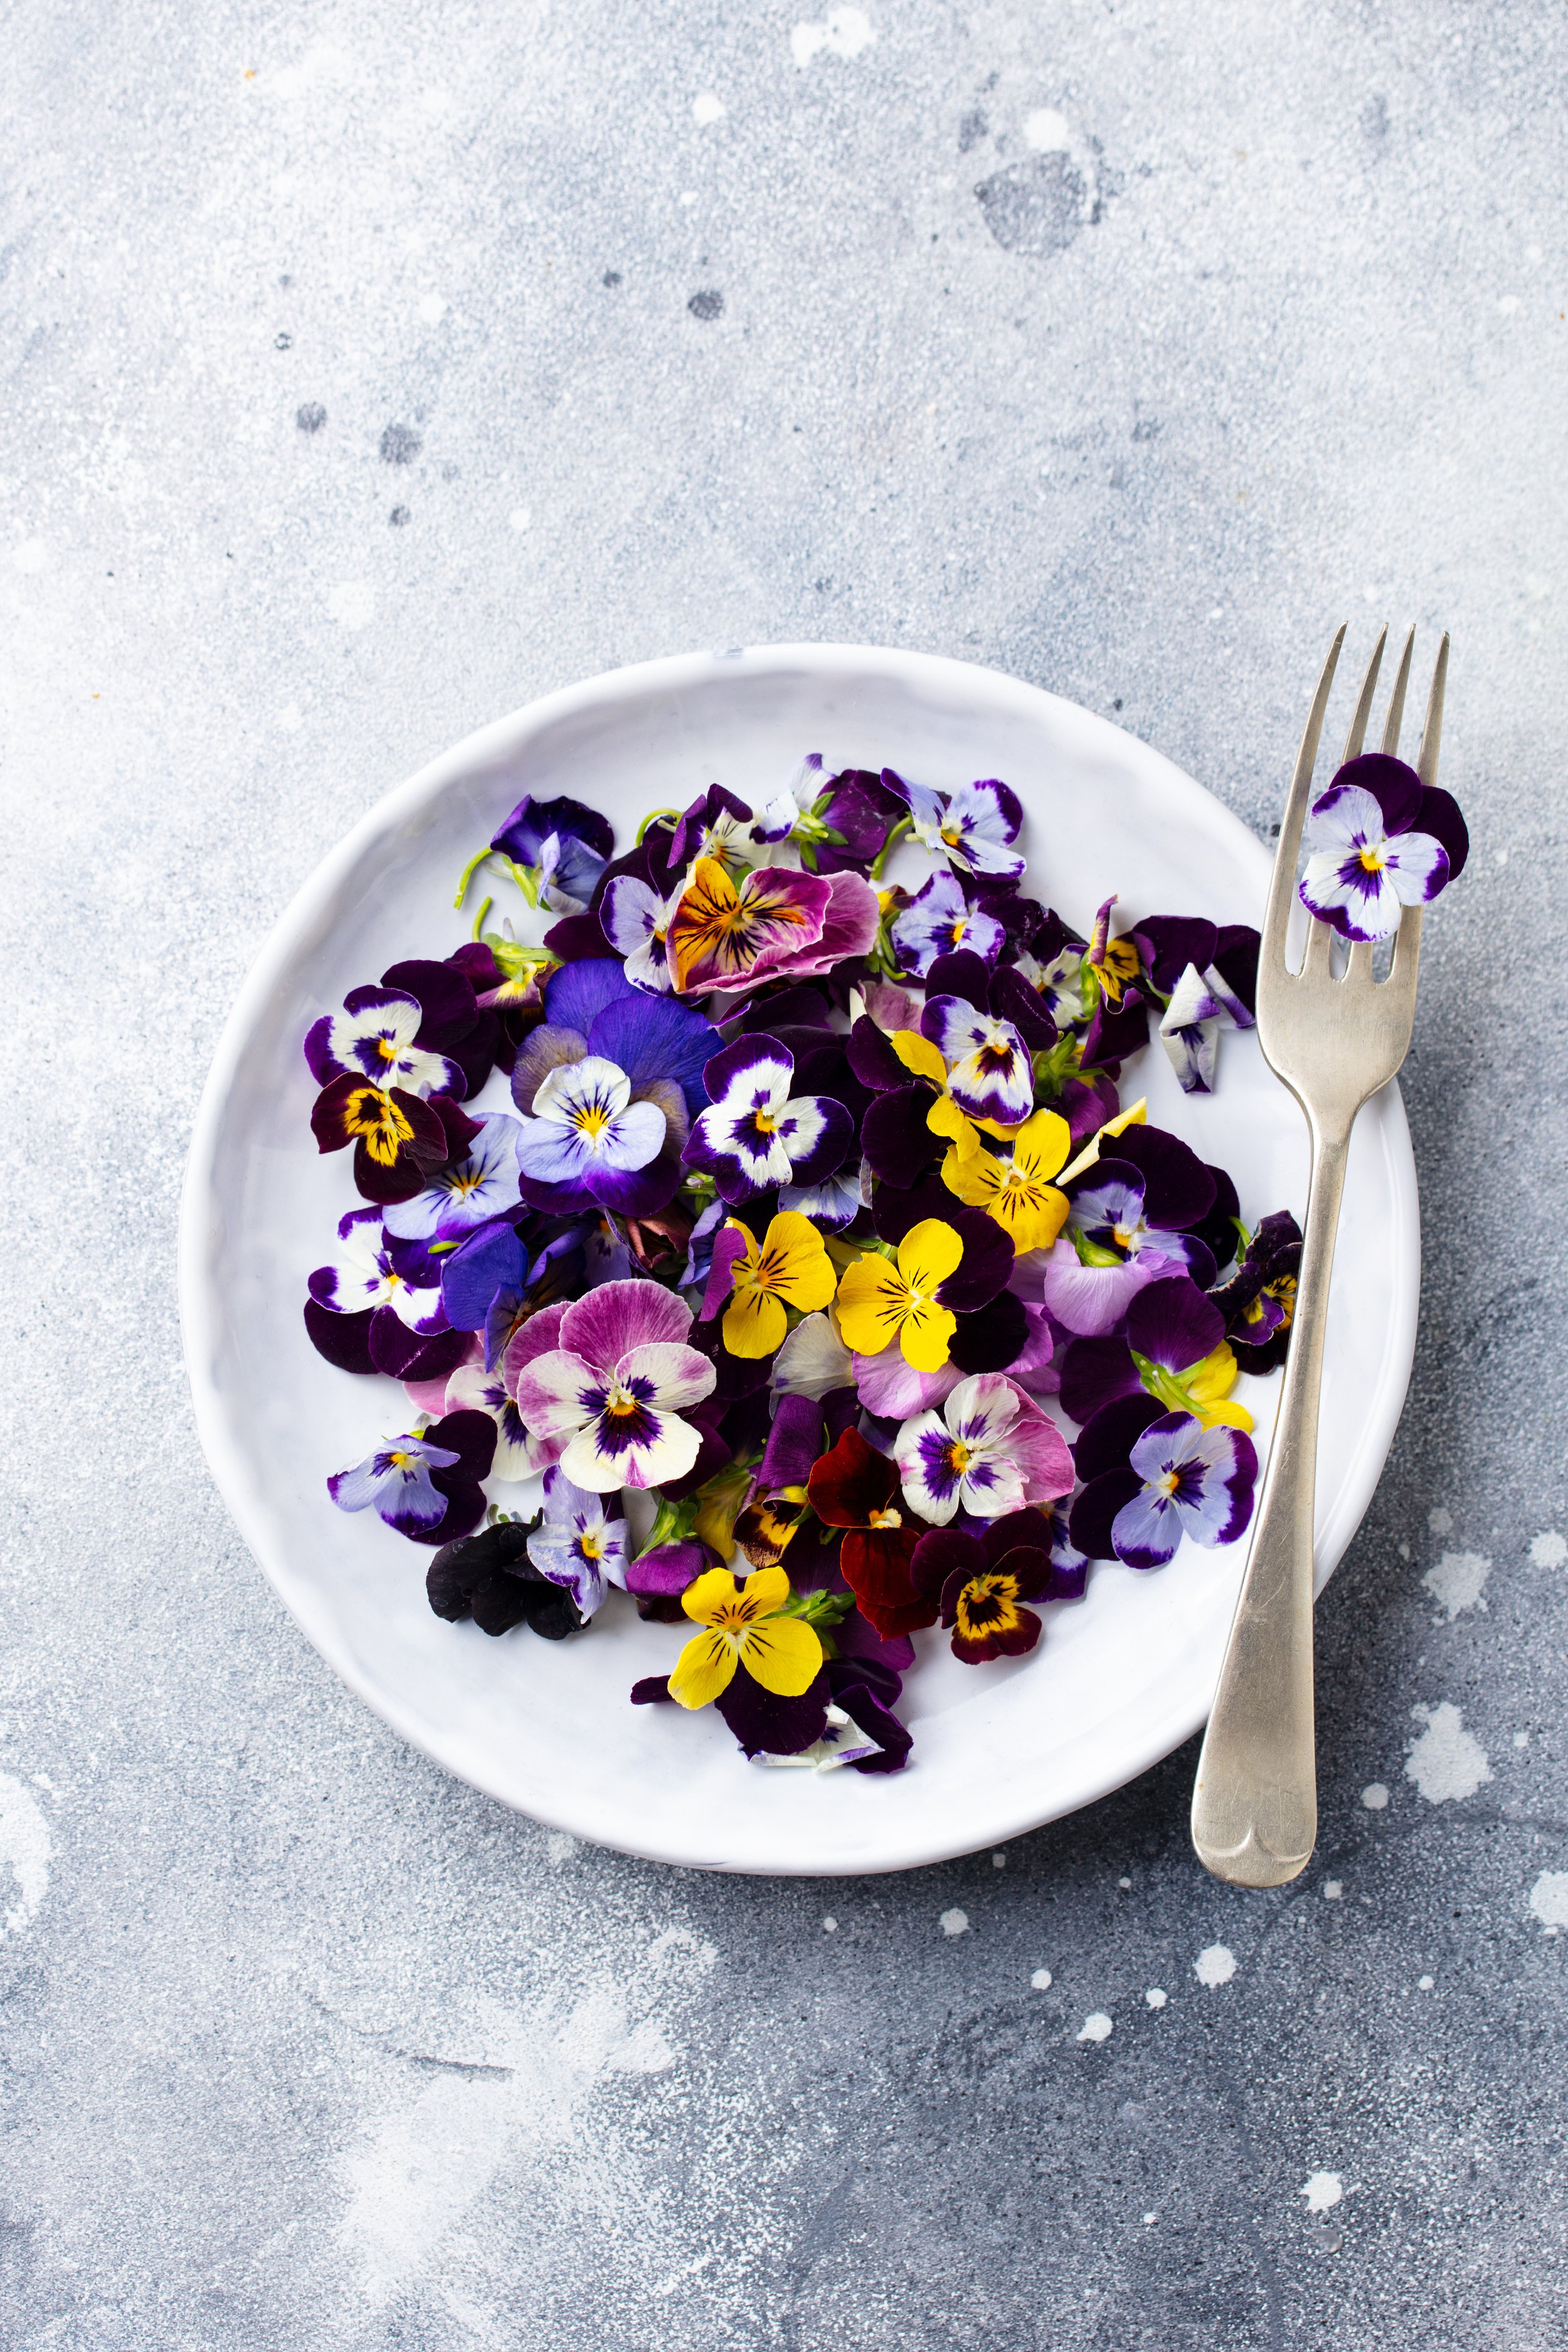 22 Edible Flowers to Grow for Salads and Garnishes - Gardening